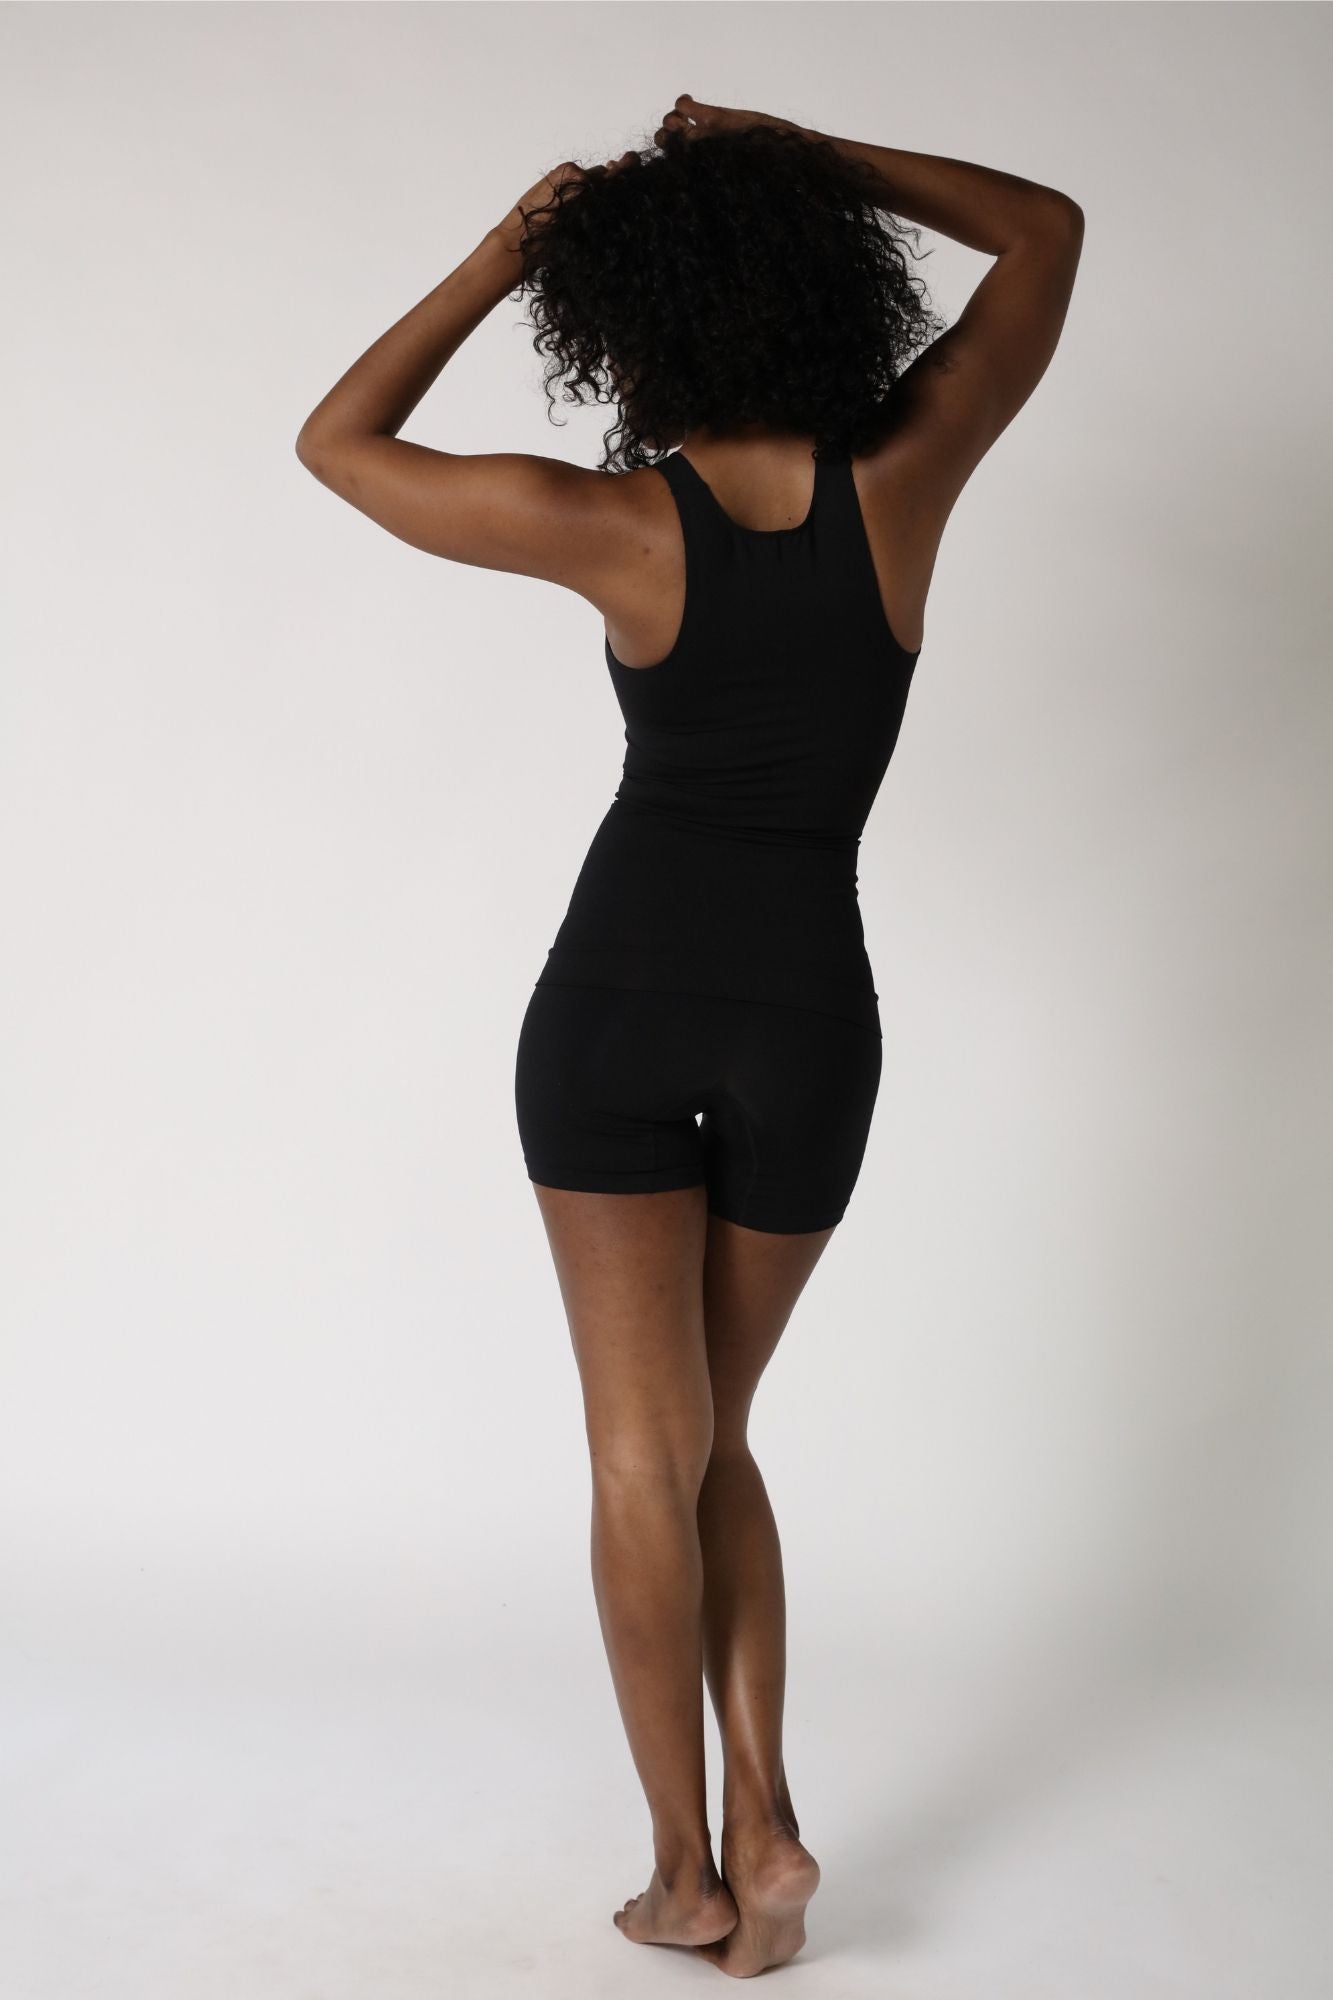 racerback top from back - Black